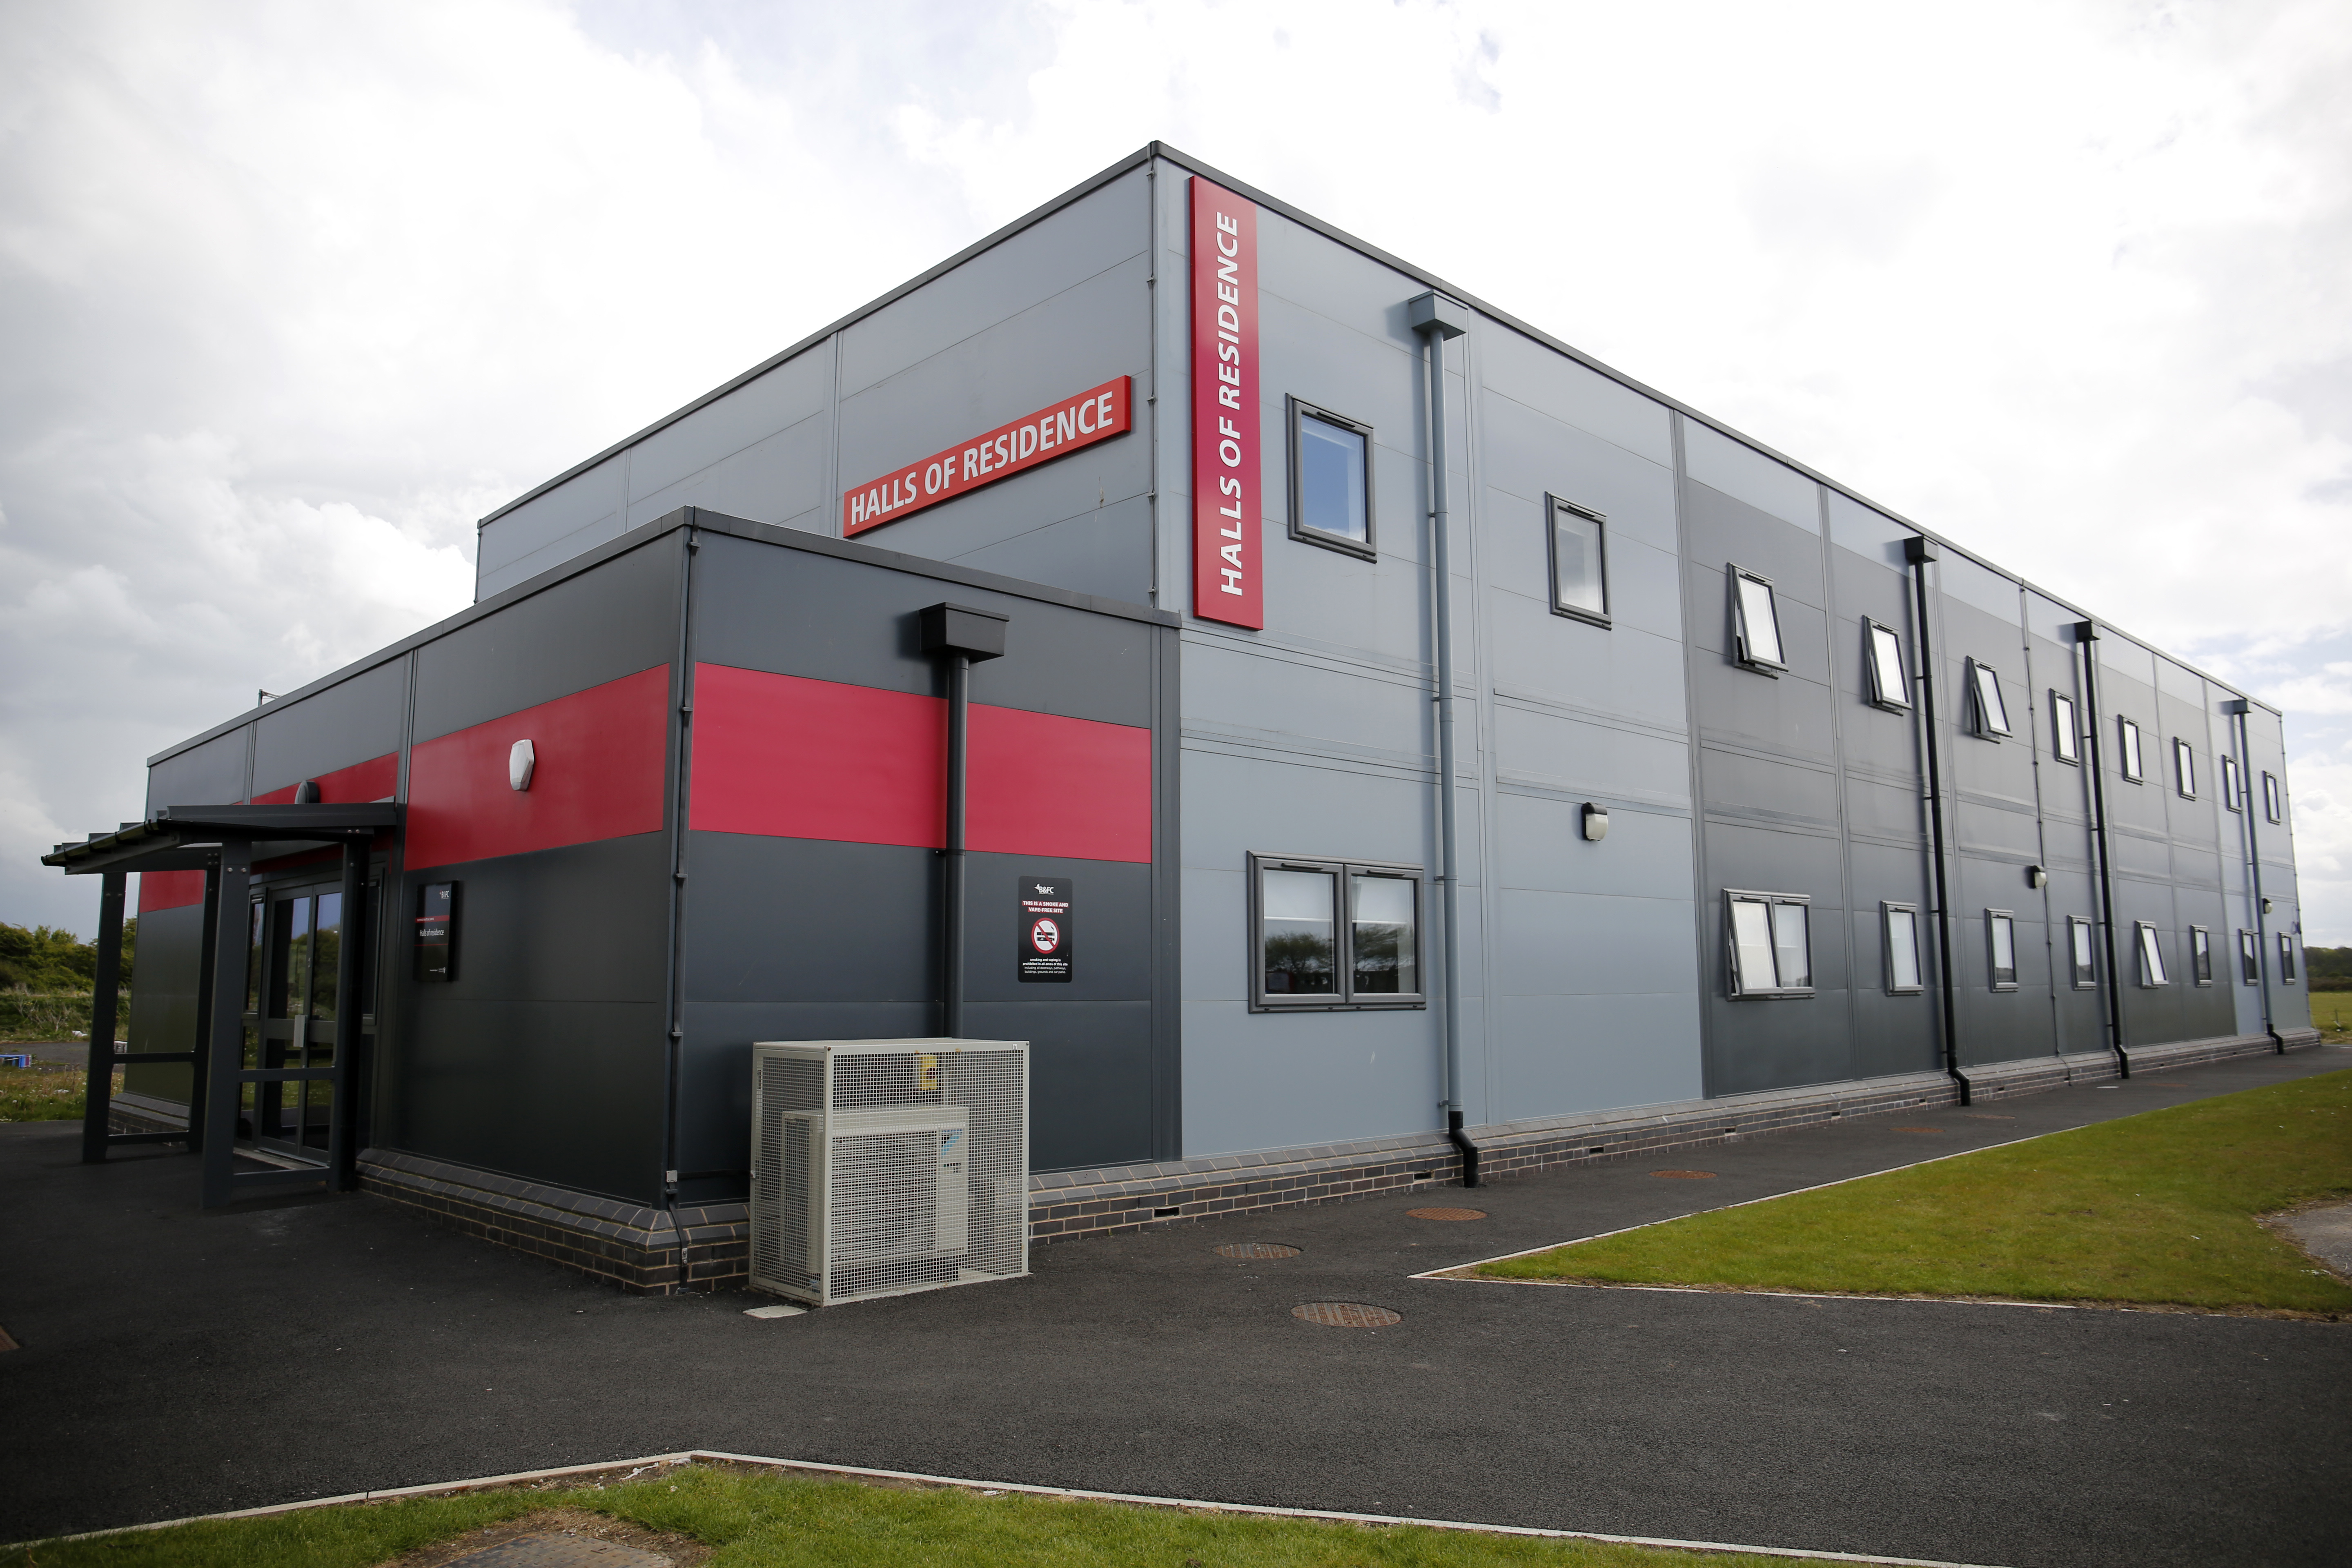 Image shows the exterior of the Halls of Residence at Fleetwood Nautical College